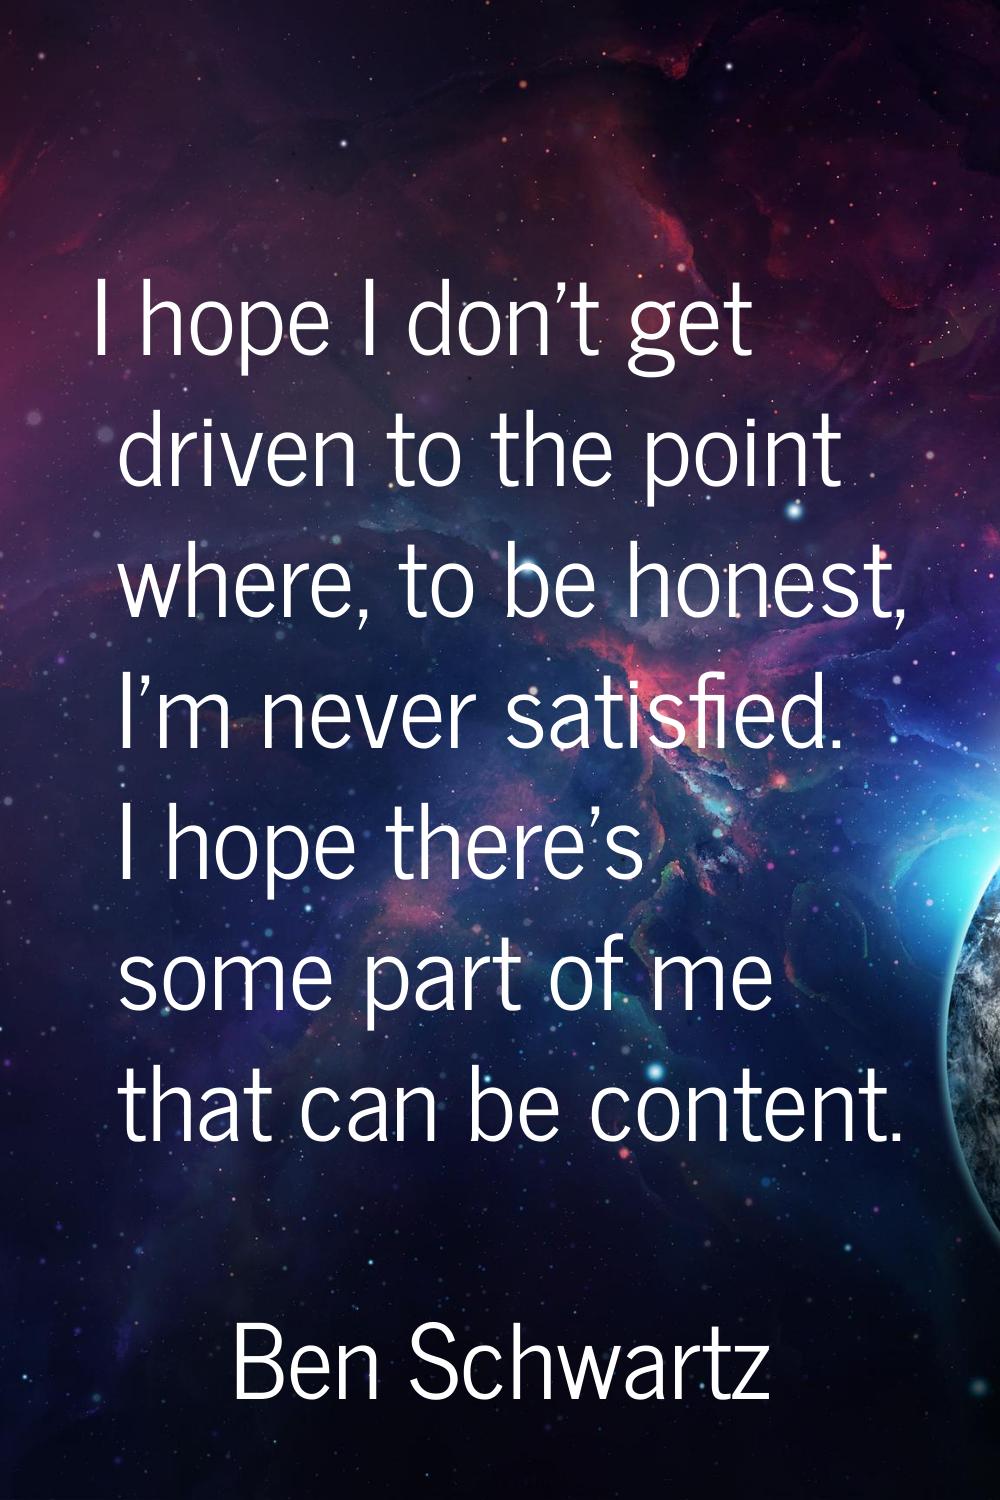 I hope I don't get driven to the point where, to be honest, I'm never satisfied. I hope there's som